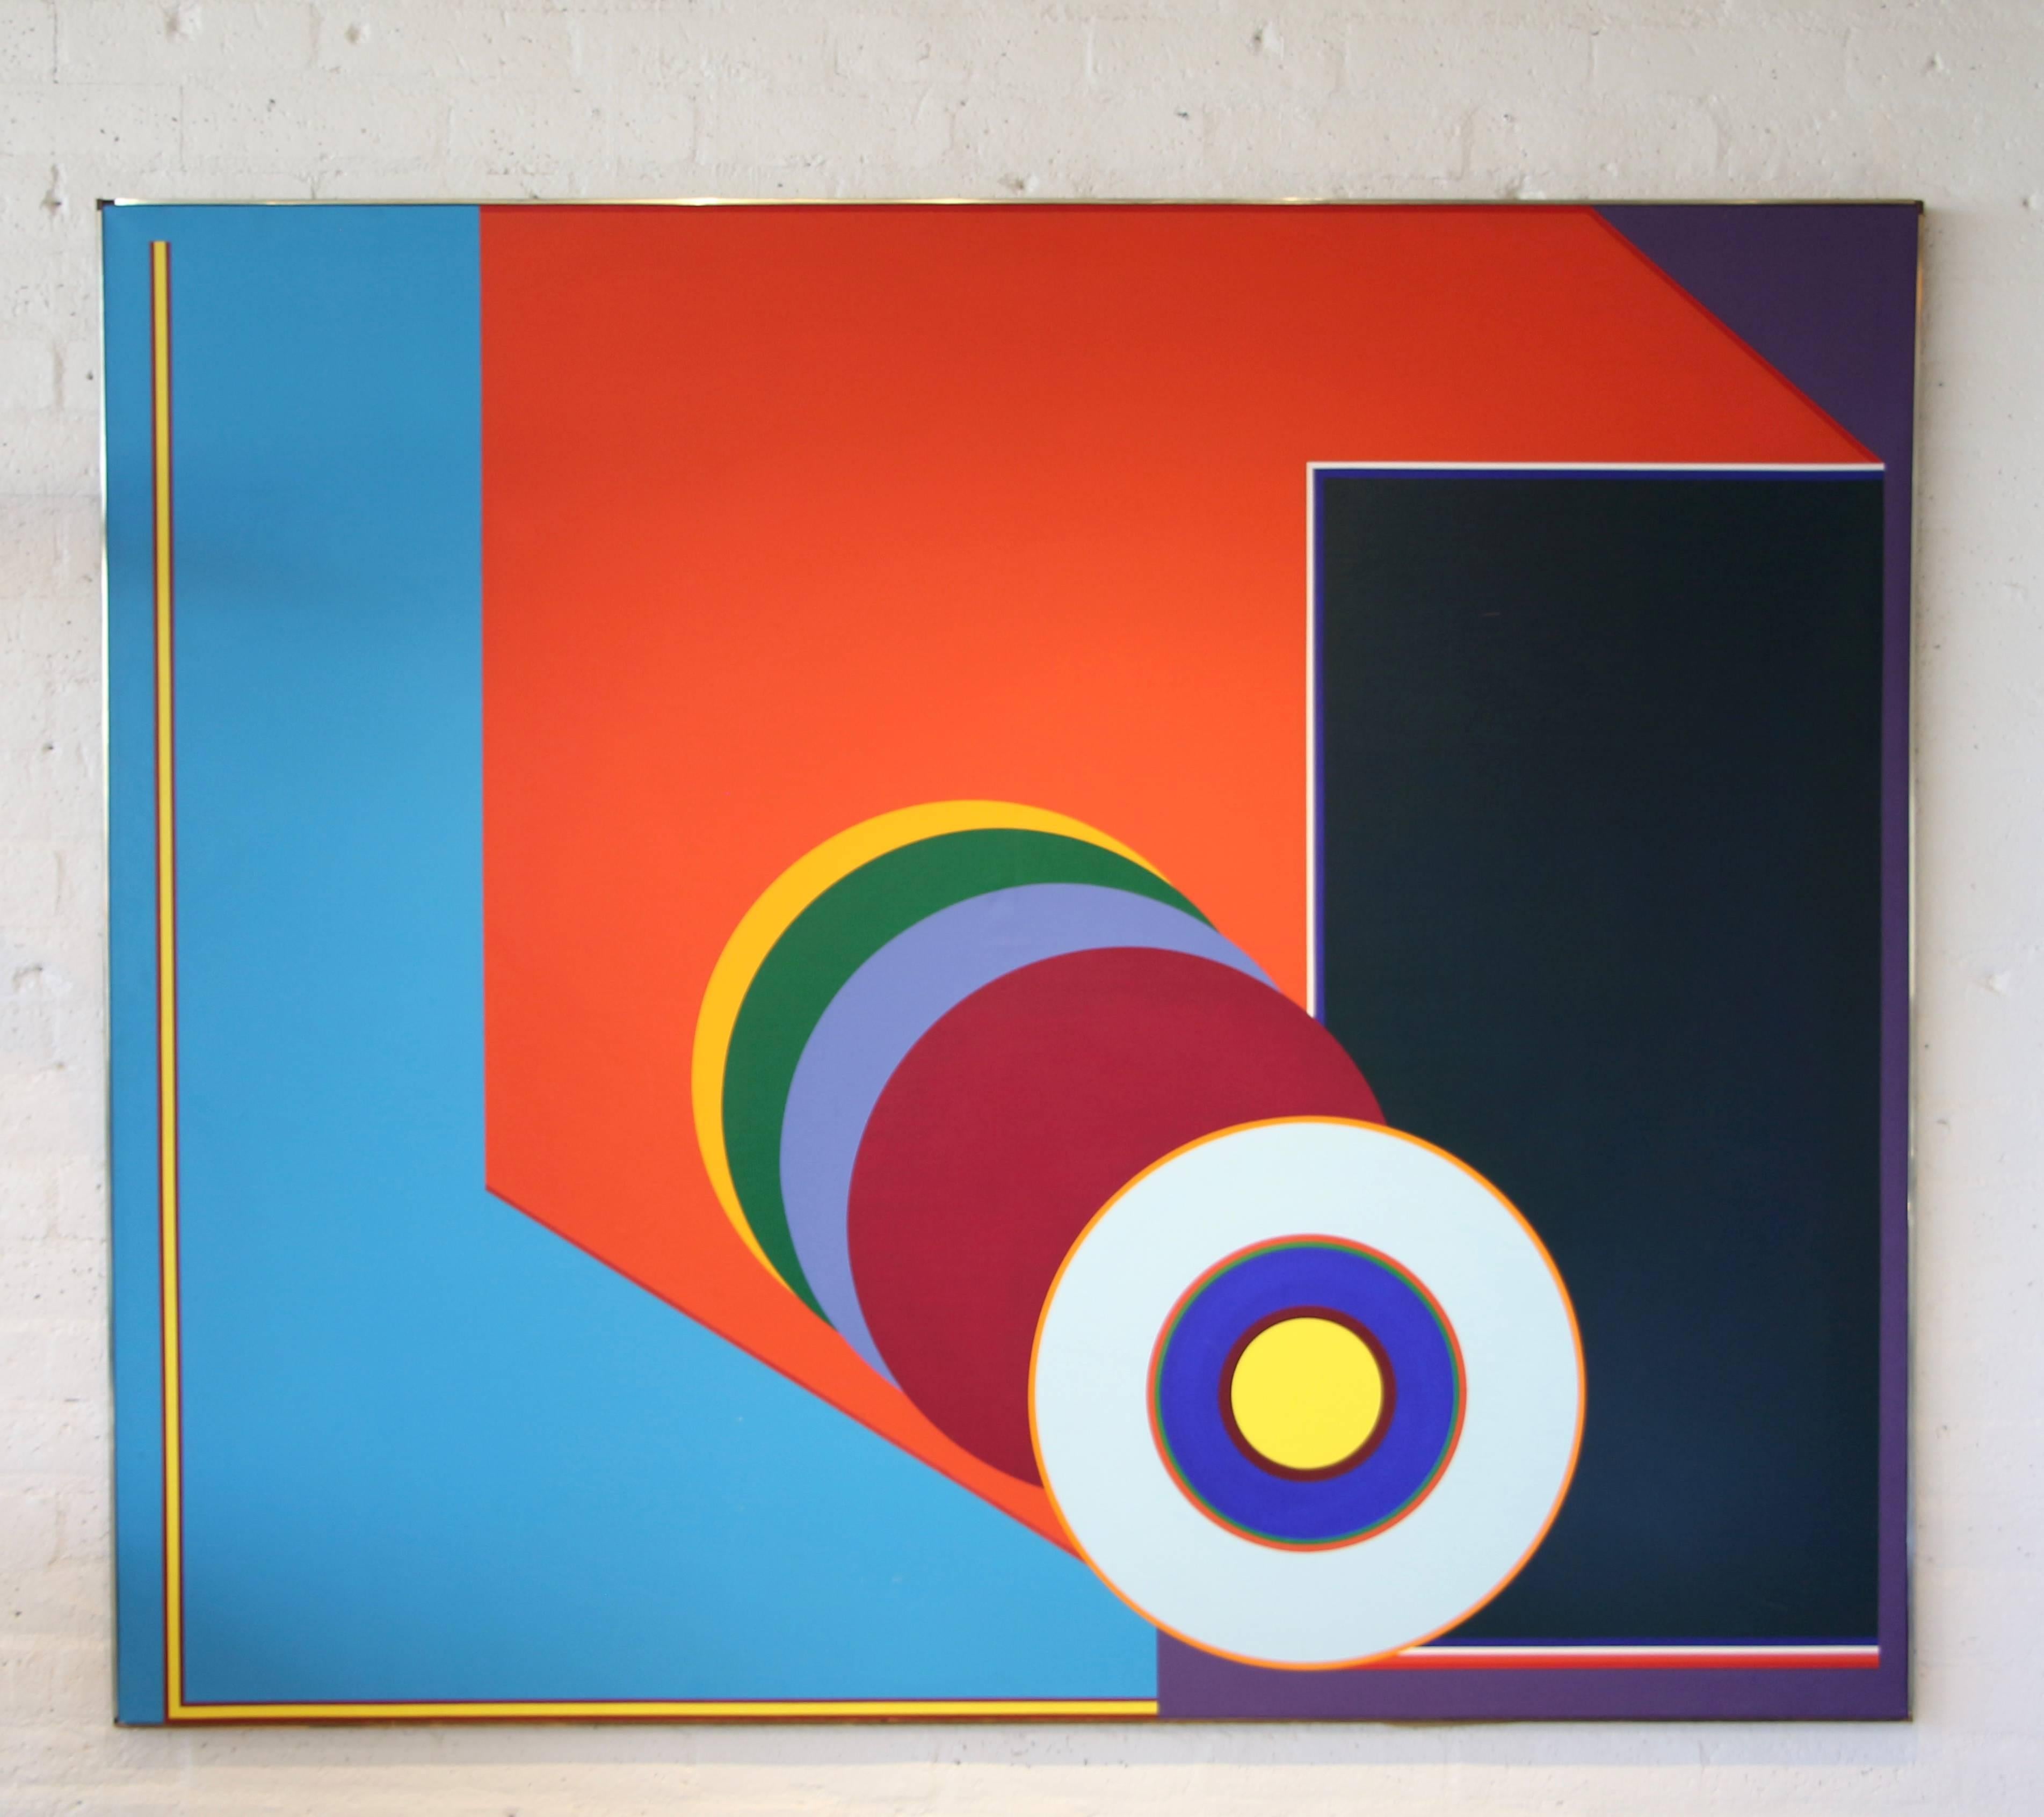 A colorful vibrant large abstract by the Massachusetts born artist James L Huntington (b.1941). The is a large work and signed and dated on the back Huntington 1967. It also priced at $8500, quite a sum in 1967. There is some minor paint loss, and